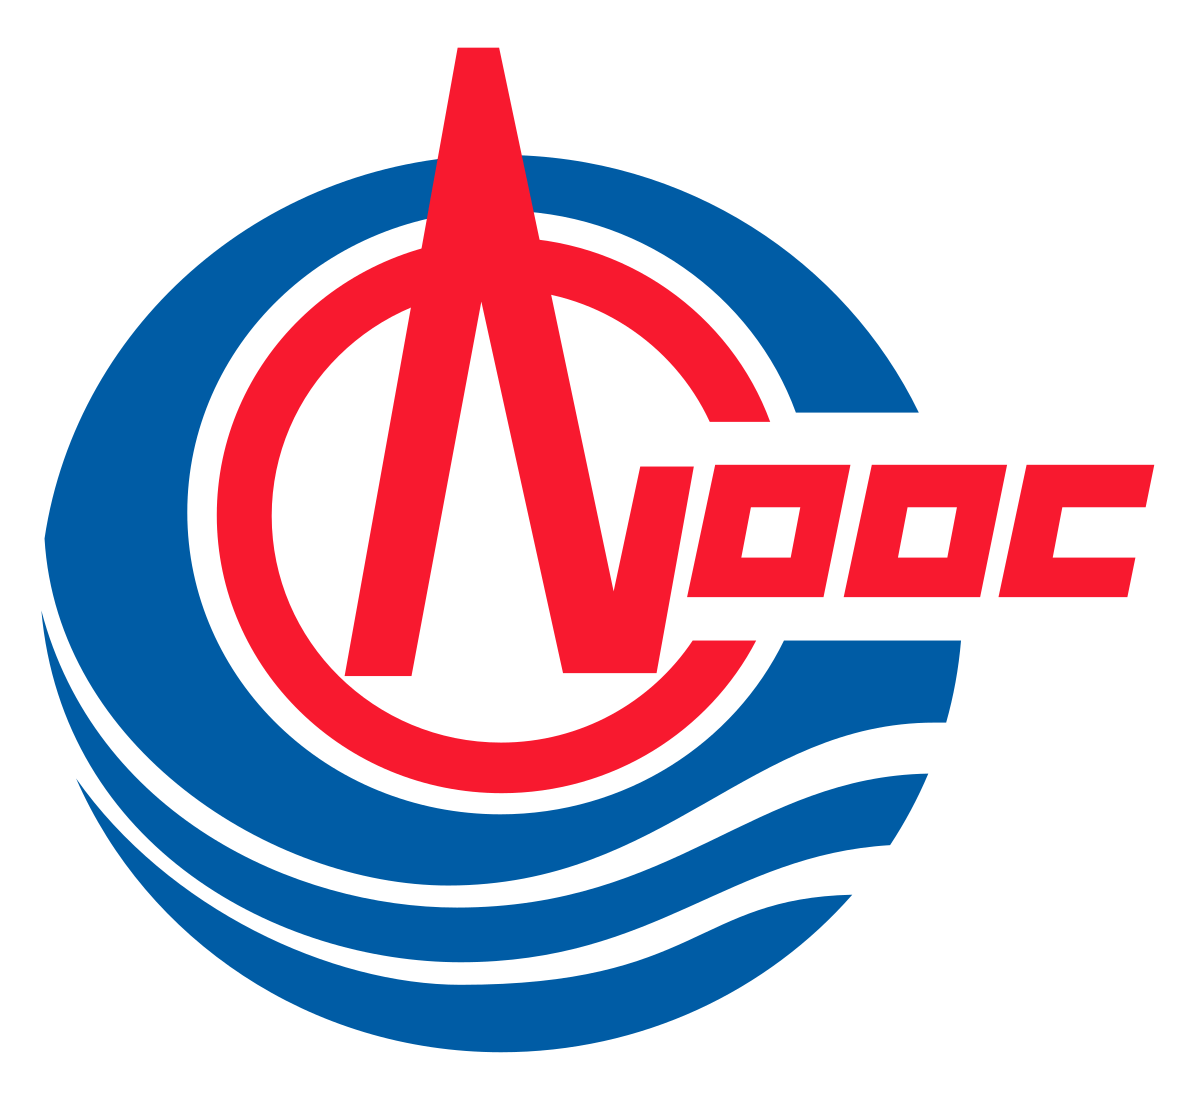 CNOOC Logo - China National Offshore Oil Corporation